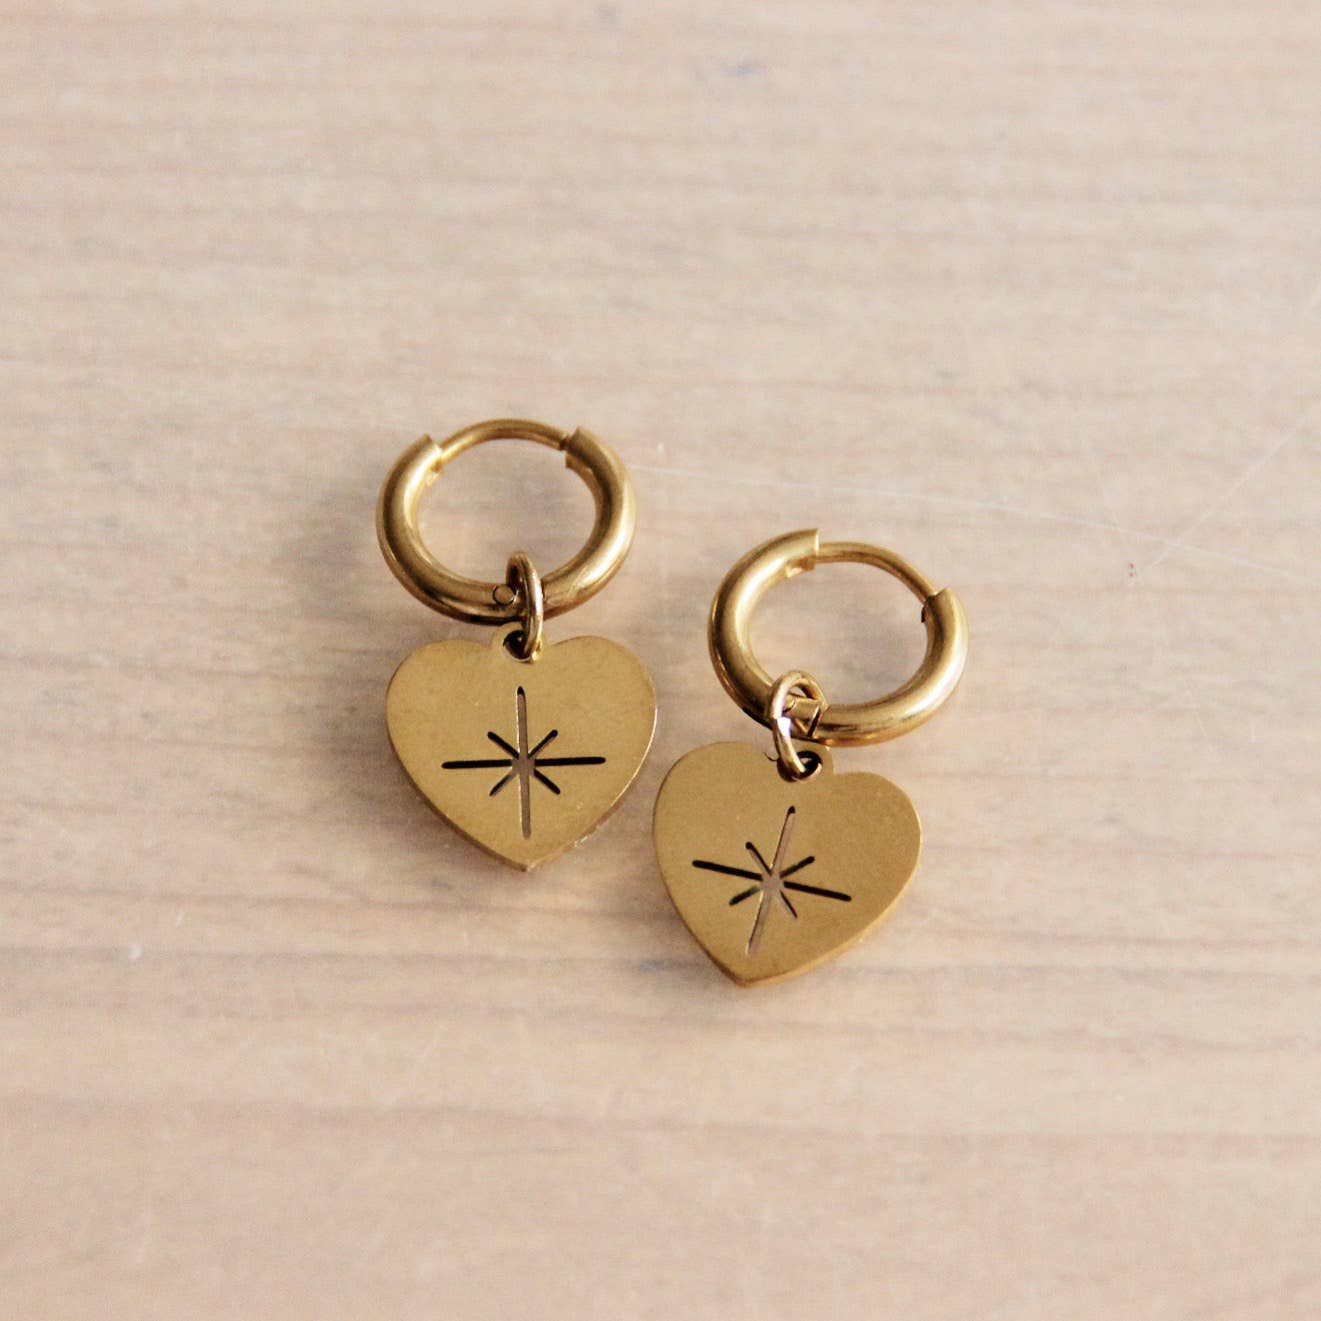 Bazou earrings with heart and northstar – gold